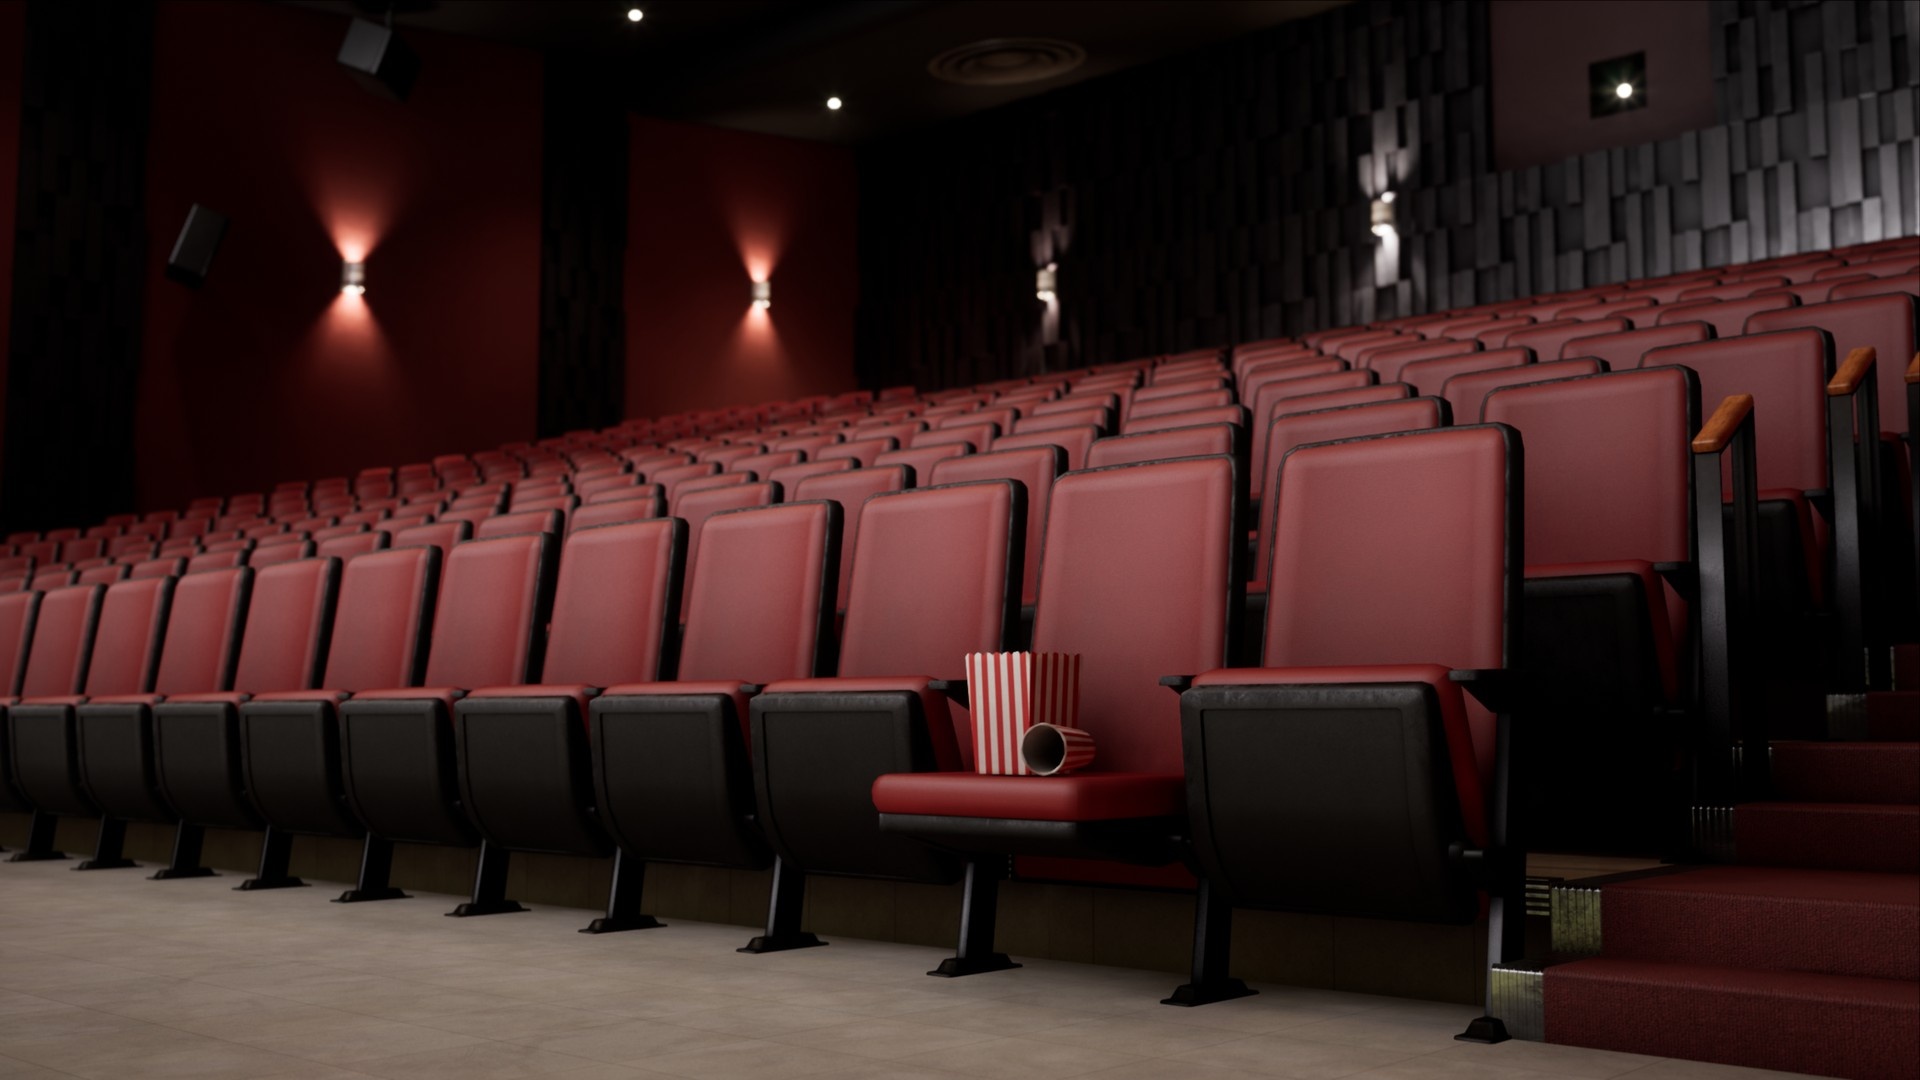 Movie theater props, Realistic designs, Set decorations, Immersive experience, 1920x1080 Full HD Desktop